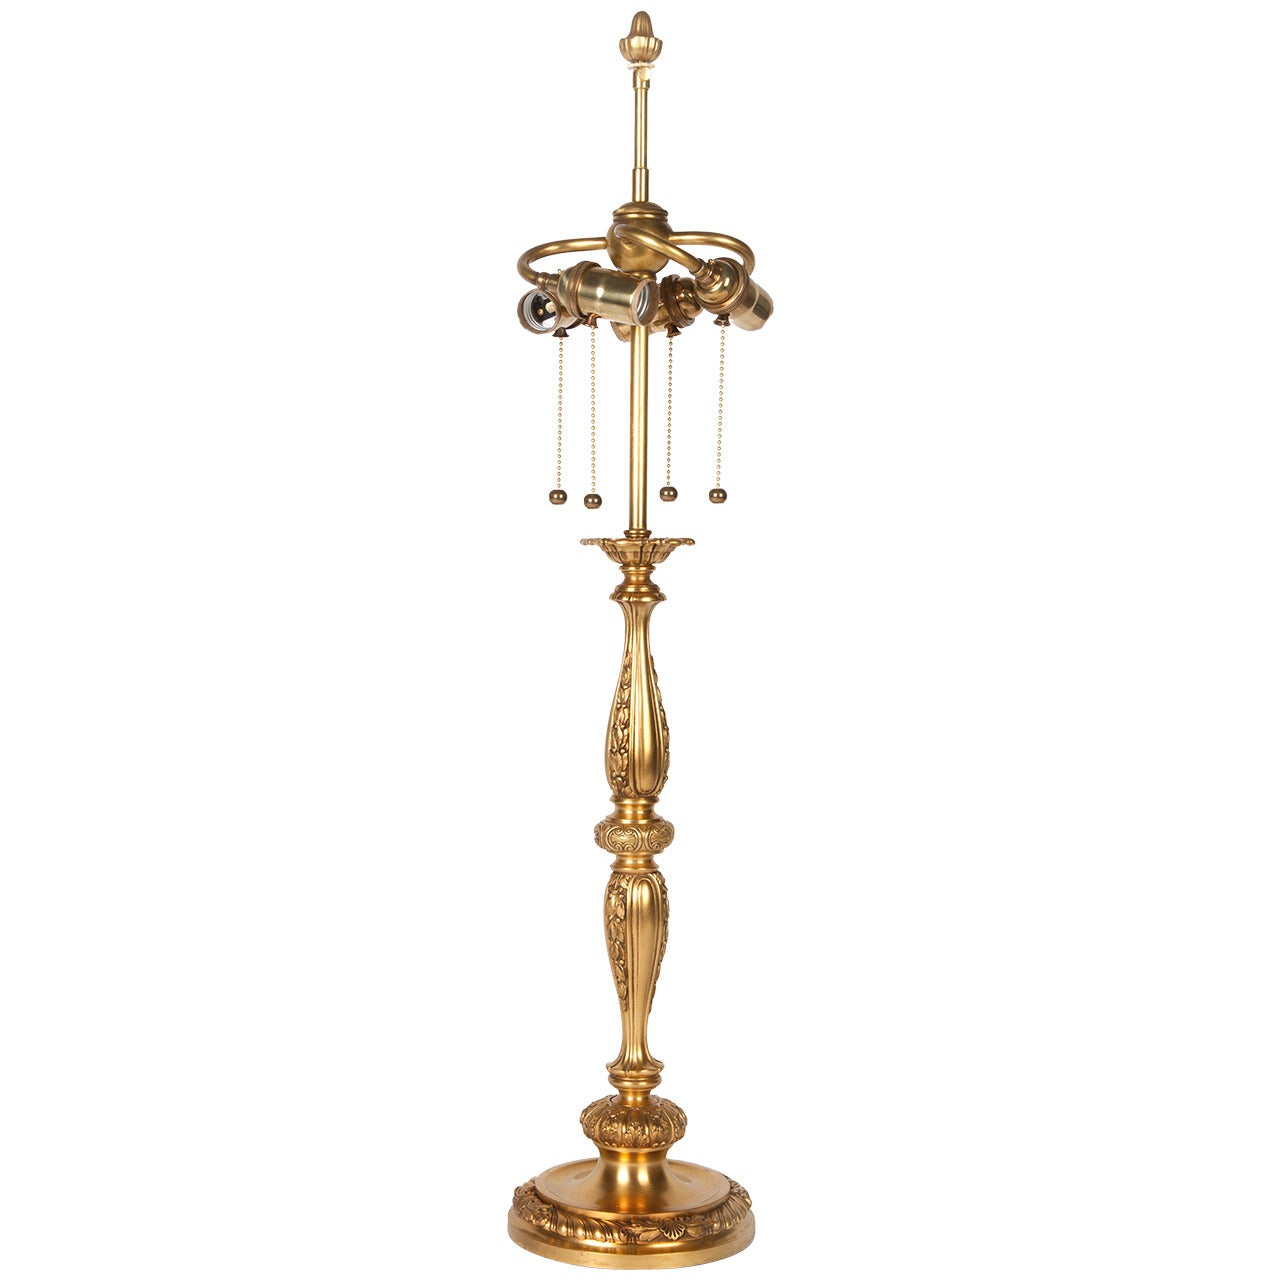 Gilded Baluster Form Lamp with Bellflowers Signed by Sterling Bronze, c. 1910s For Sale